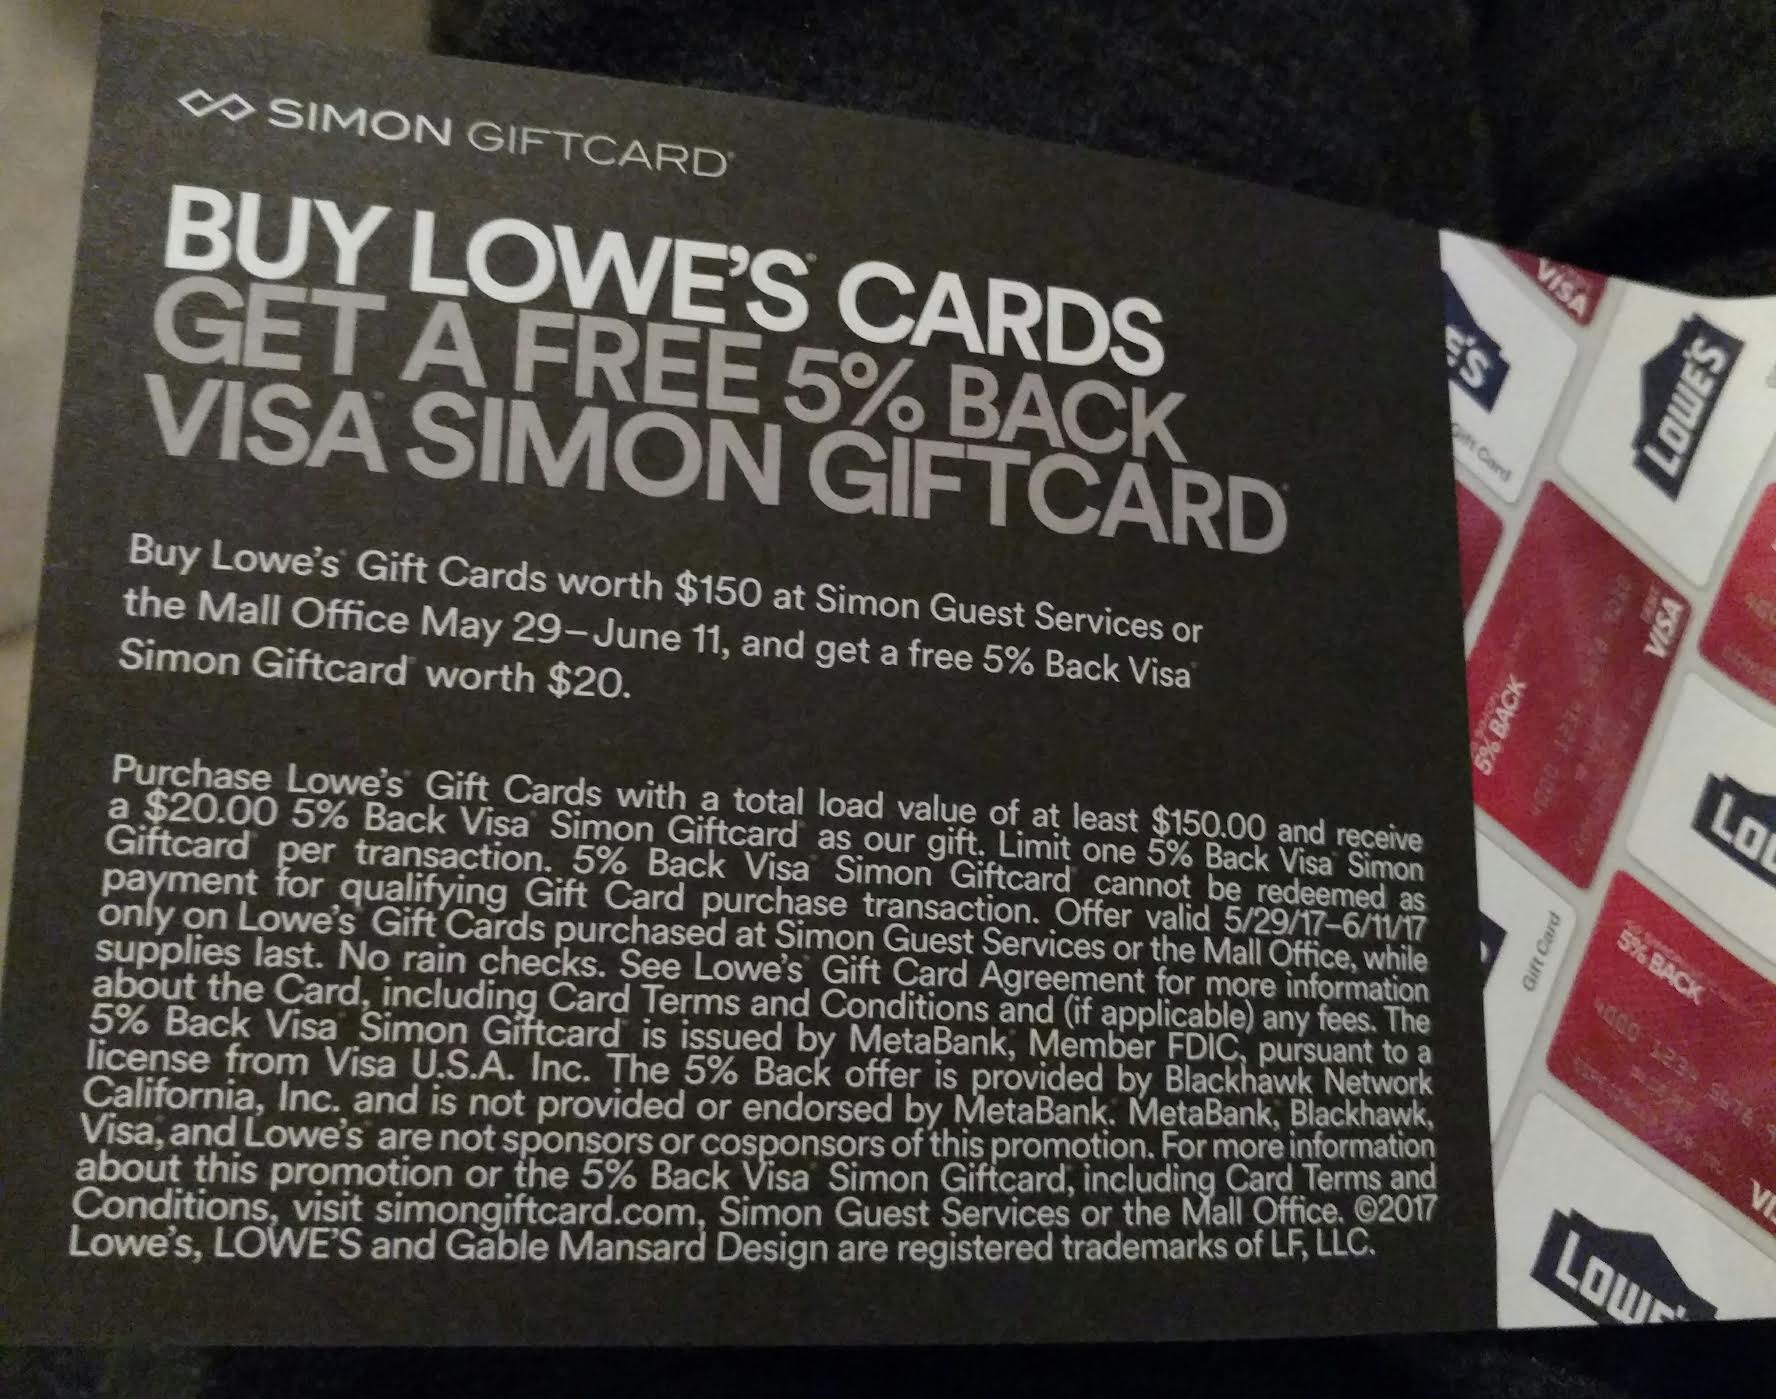 simon-mall-save-on-gift-cards-for-lowe-s-gamestop-itunes-5-29-6-11